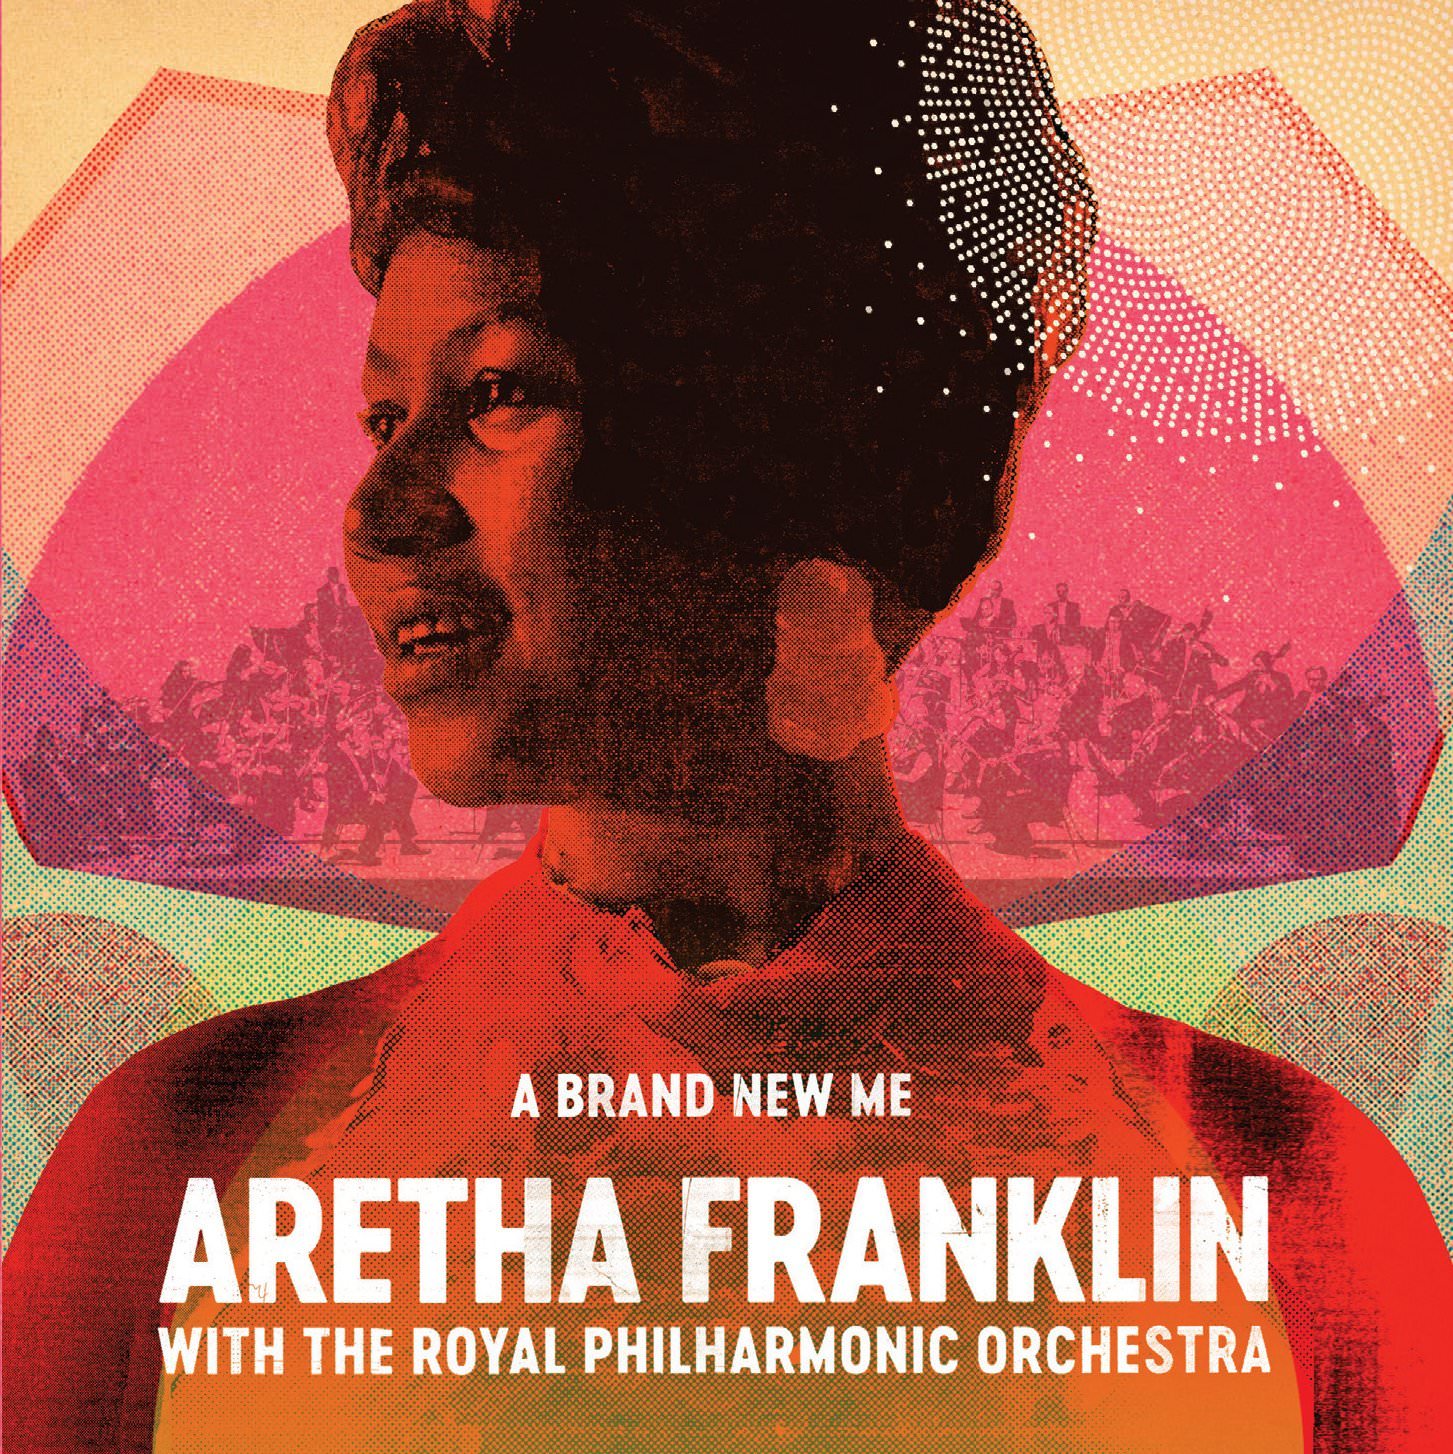 Aretha Franklin – A Brand New Me: Aretha Franklin (with The Royal Philharmonic Orchestra) (2017) [FLAC 24bit/44,1kHz]